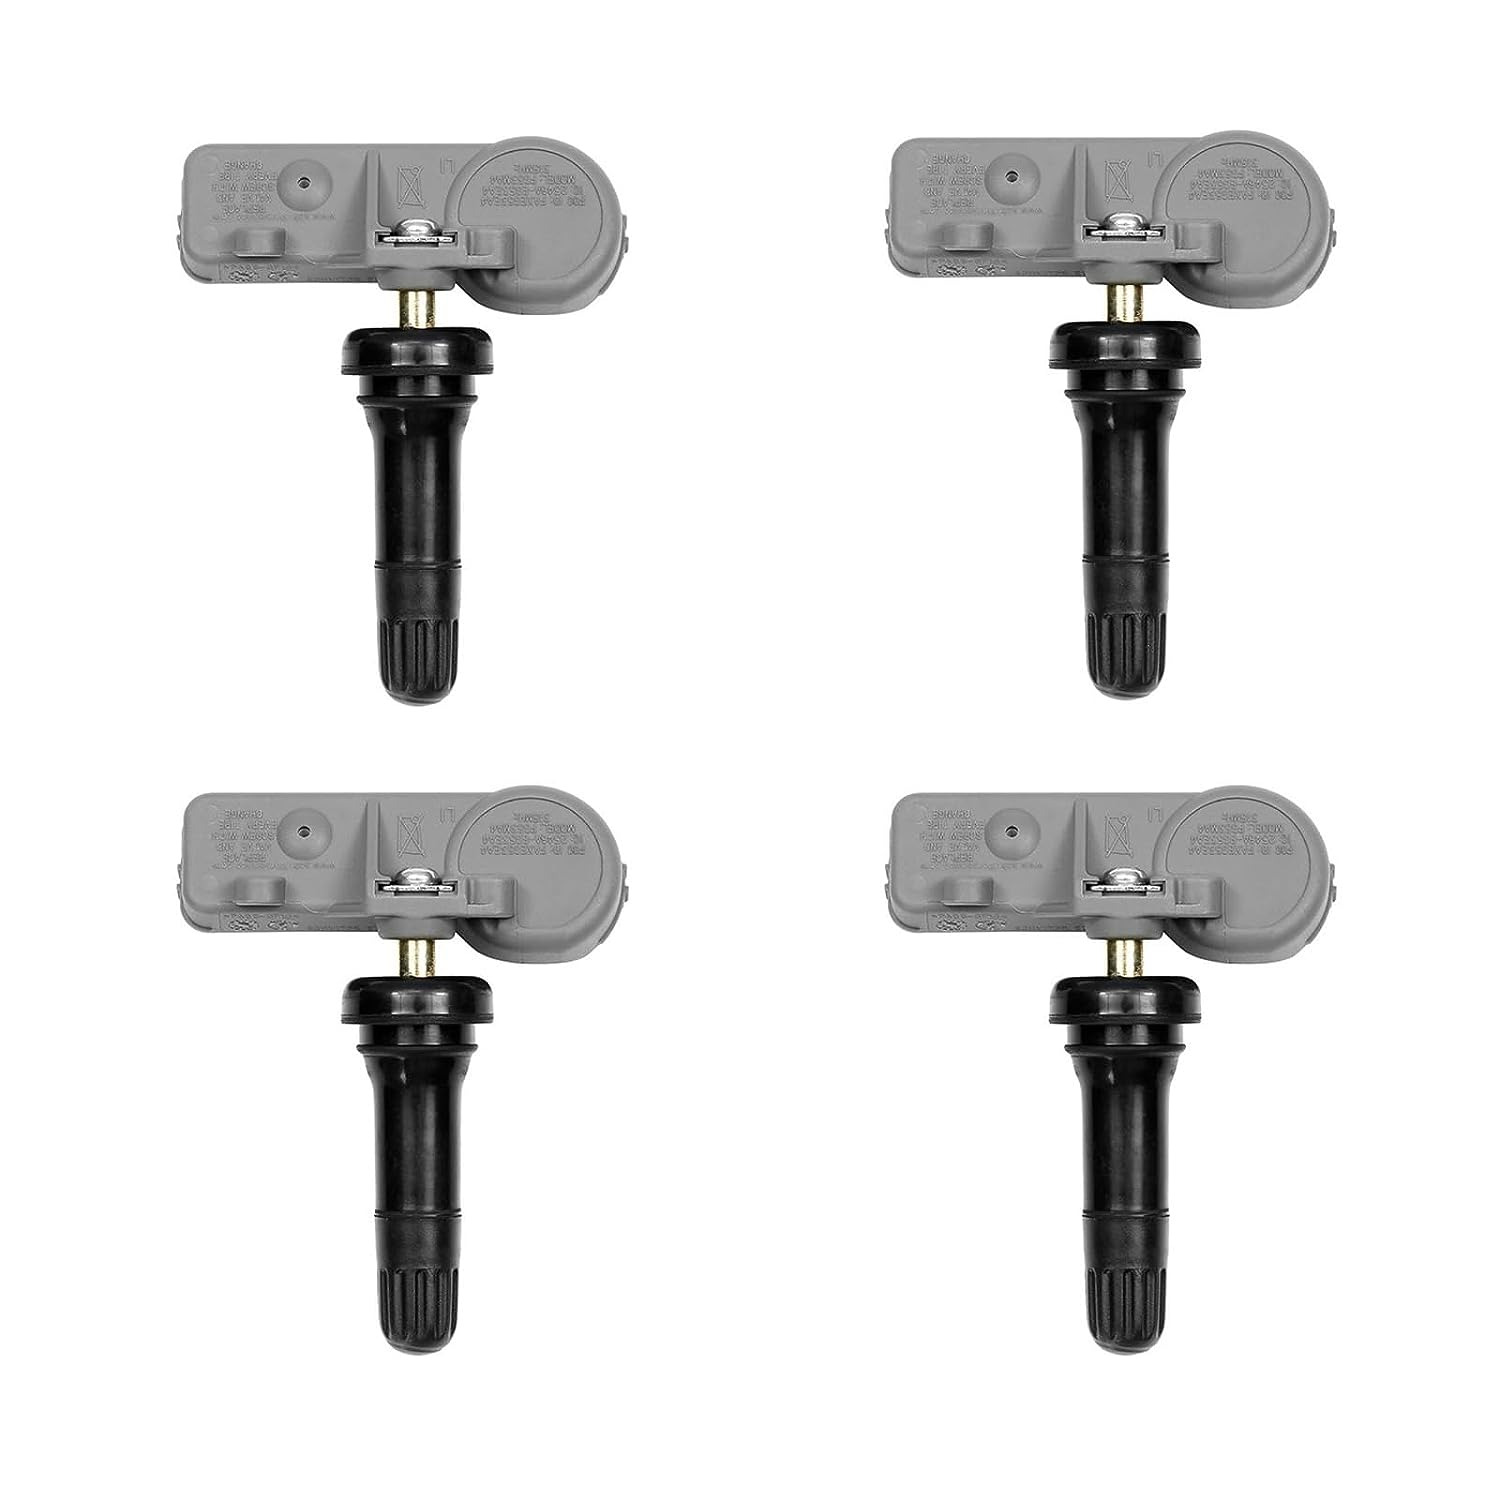 Tire Pressure Sensor 315Mhz TPMS Snap-In 4Pcs Compatible with Chevy GMC Cadillac